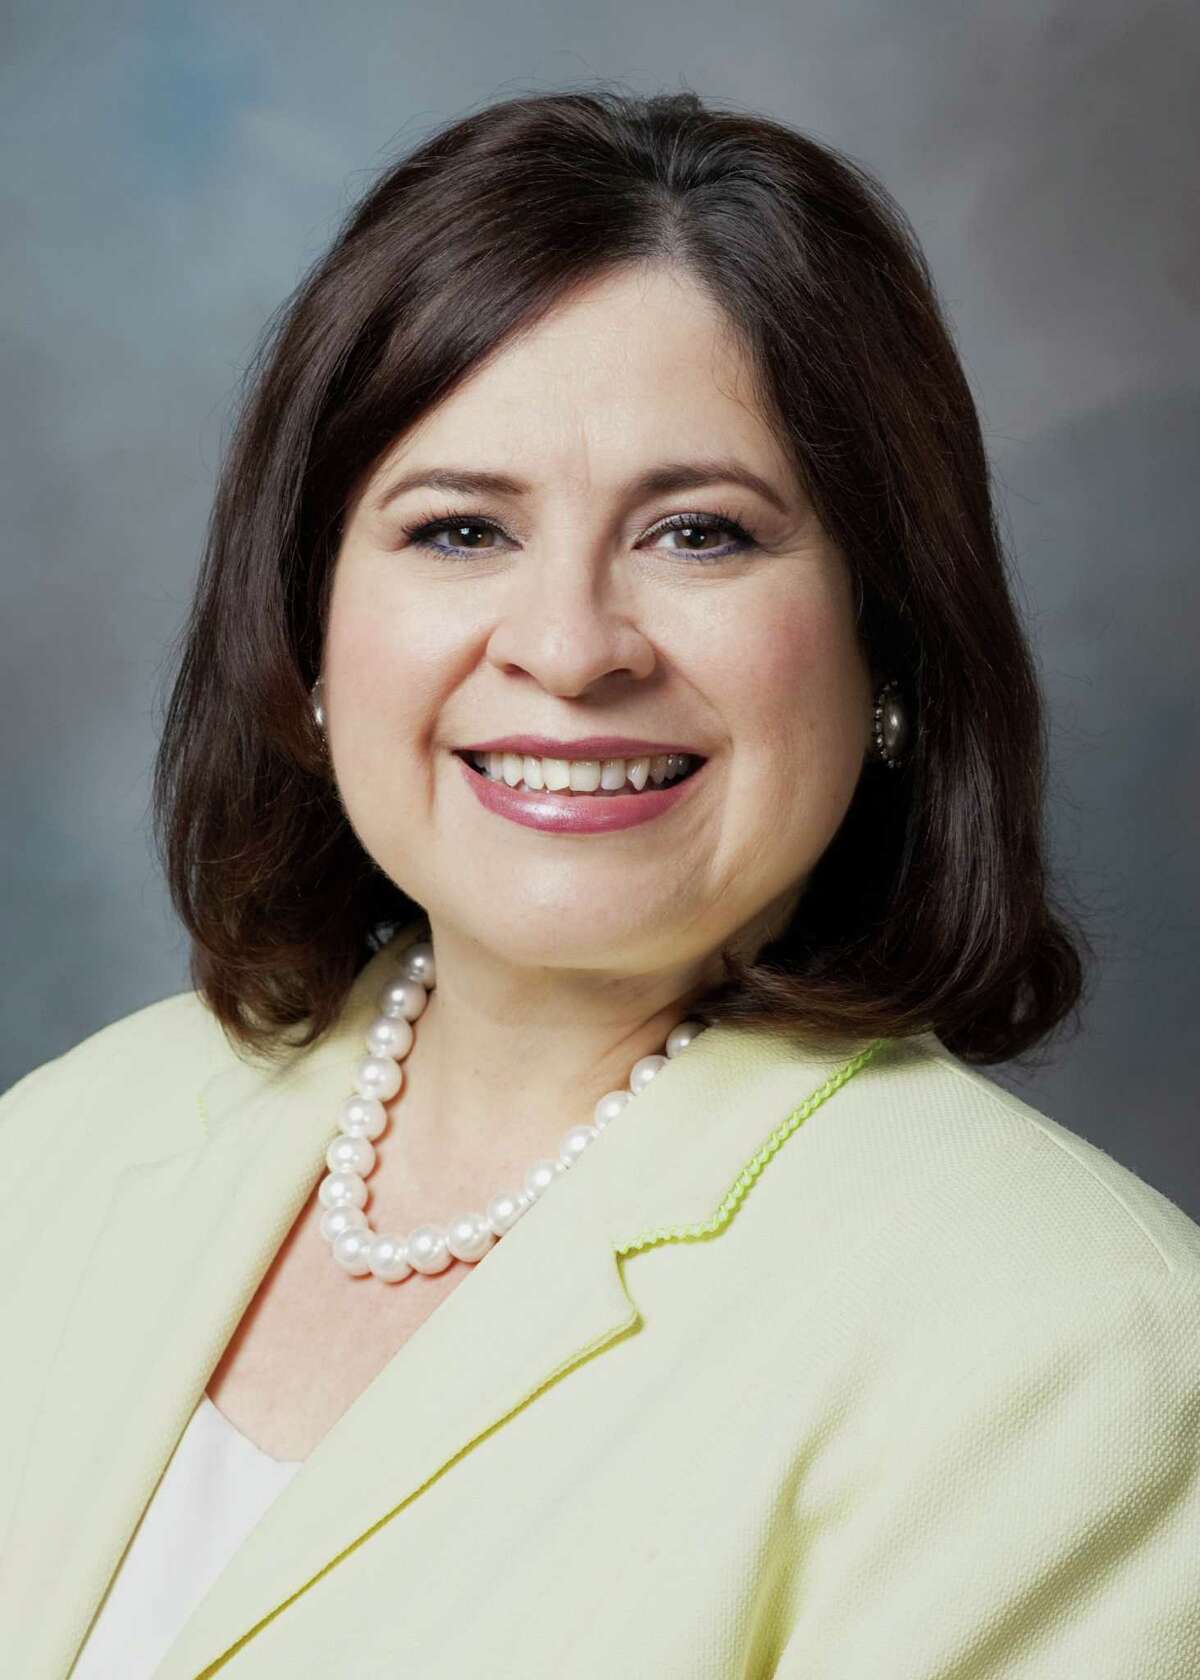 Leticia R. San Miguel Van de Putte (December 6, 1954) is a Democratic member of the Texas Senate representing the 26th District. She was previously a member of the Texas House of Representatives. Van de Putte is currently running for the Democratic nomination for Lieutenant Governor of Texas in the 2014 elections.